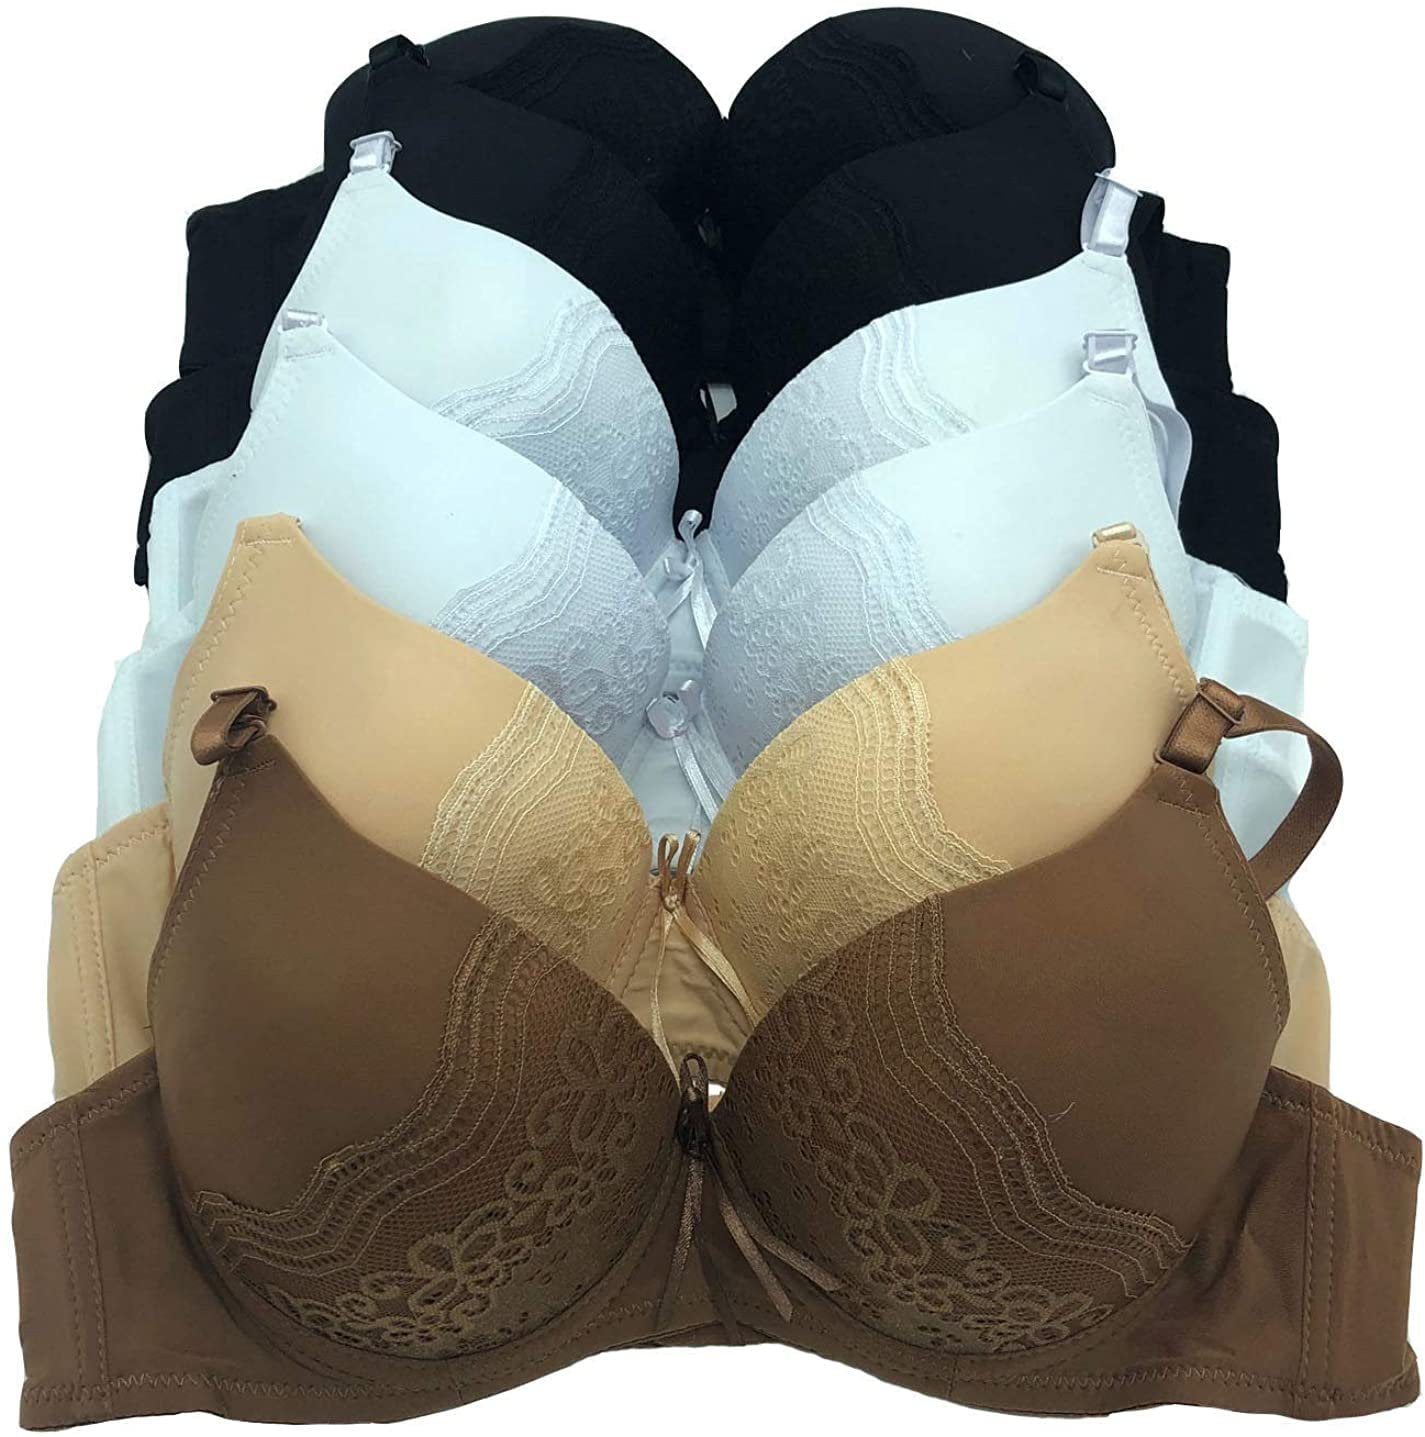 Women Bras 6 Pack of Double Pushup Lace Bra B cup C cup Size 36B (9904)